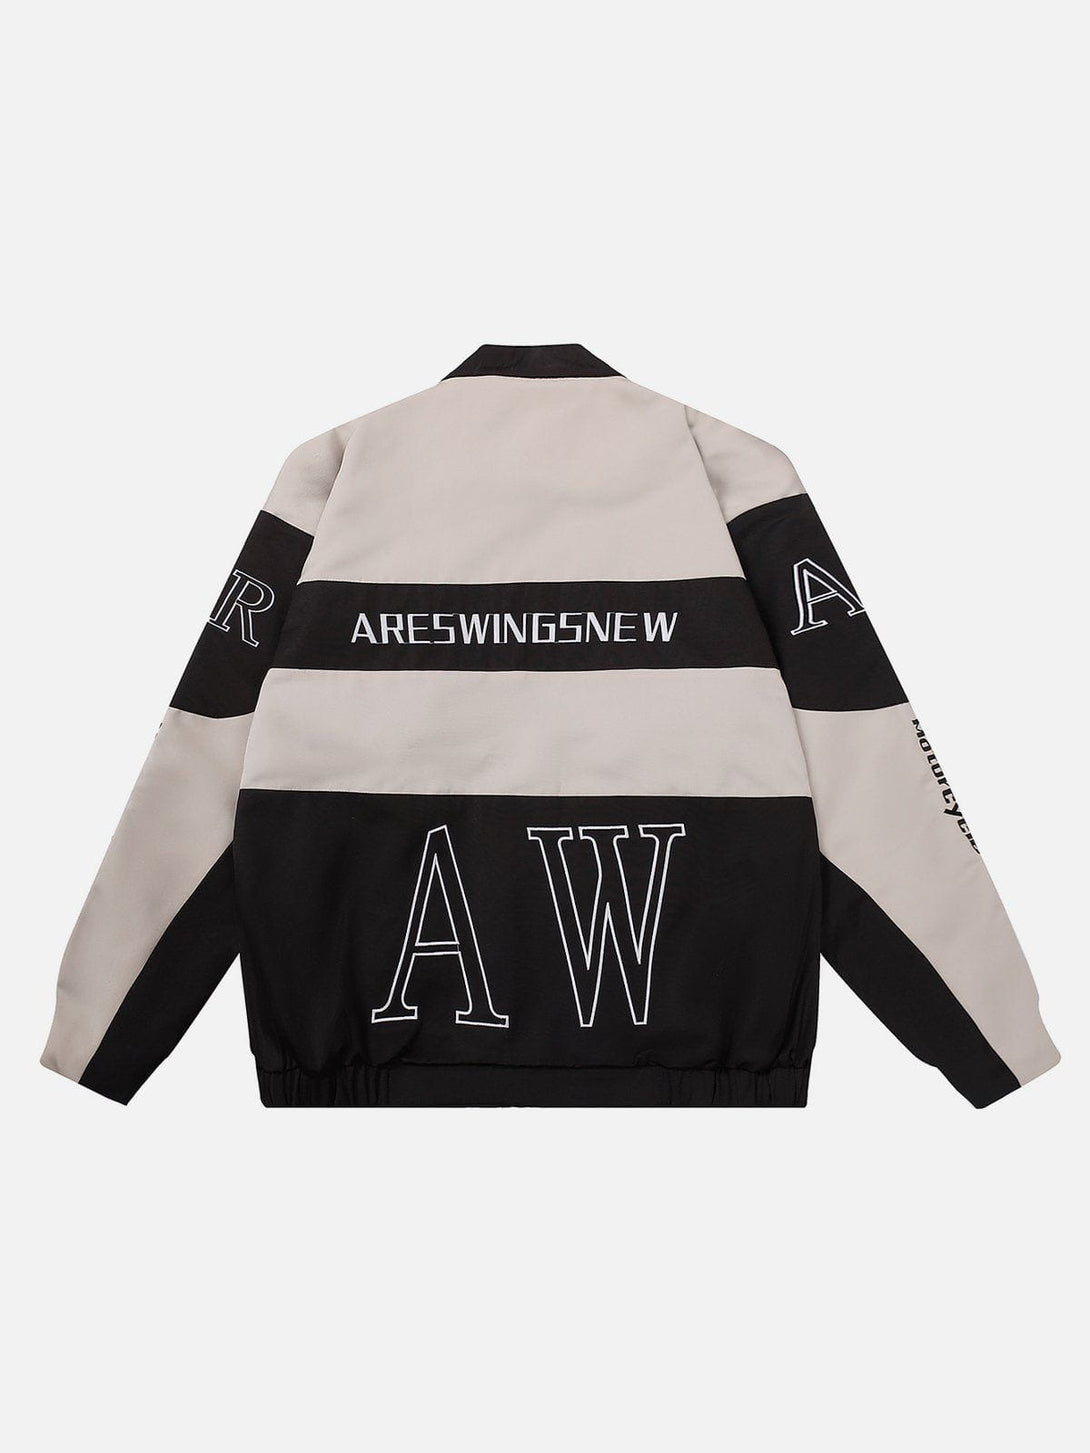 Levefly - "AW" Patchwork Motorcycle Jacket - Streetwear Fashion - levefly.com